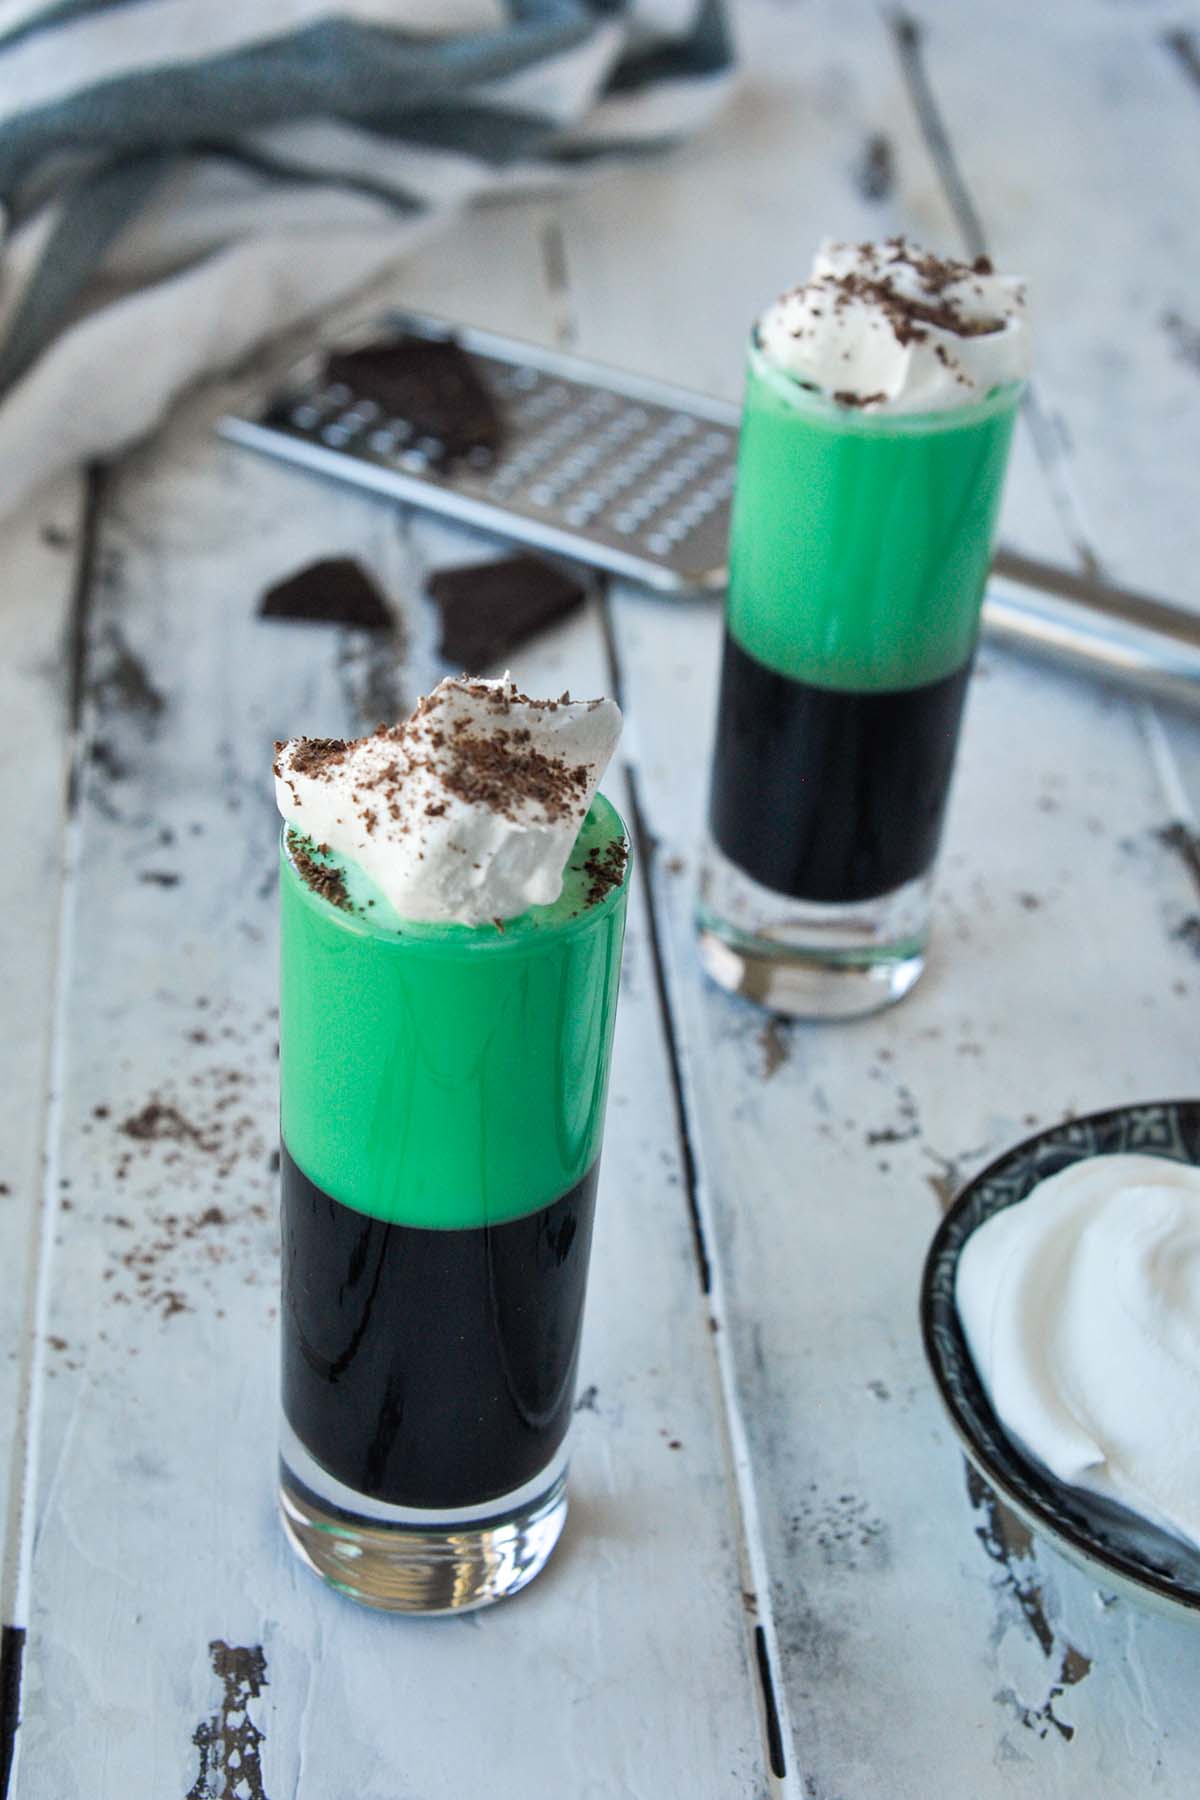 Two grasshopper shots topped with whipped cream and chocolate shavings with a small bowl of whipped cream.